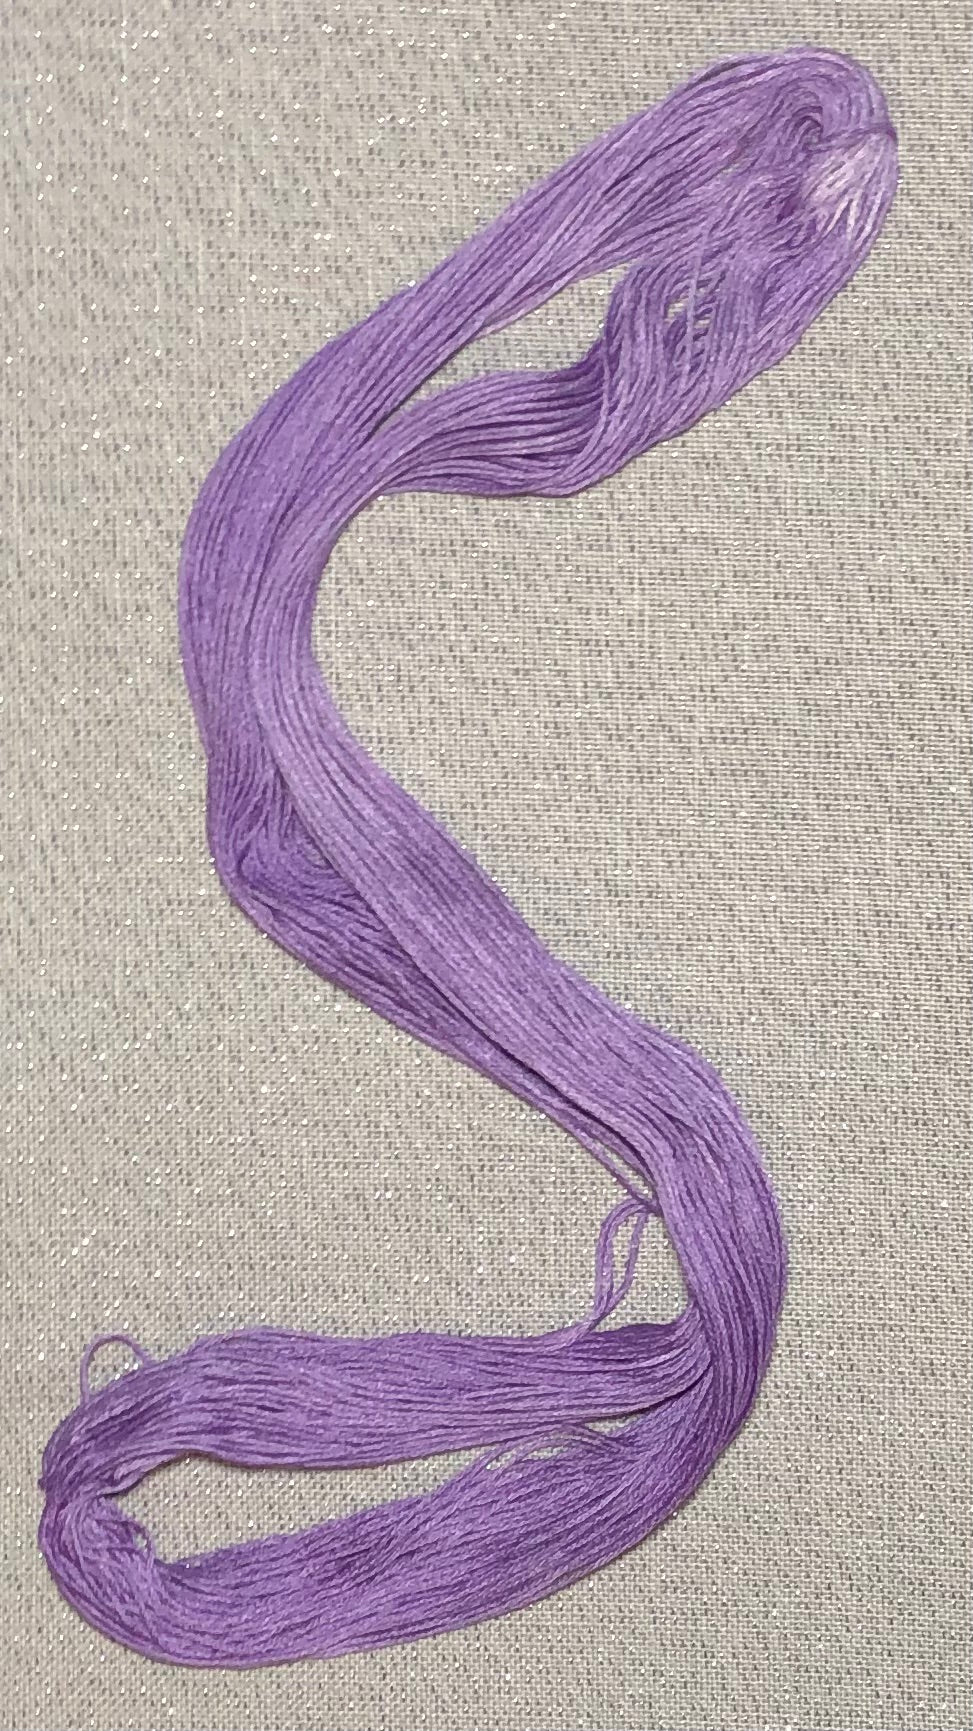 Silk hand dyed floss - Twist -n- Shout - Dyeing for Cross Stitch